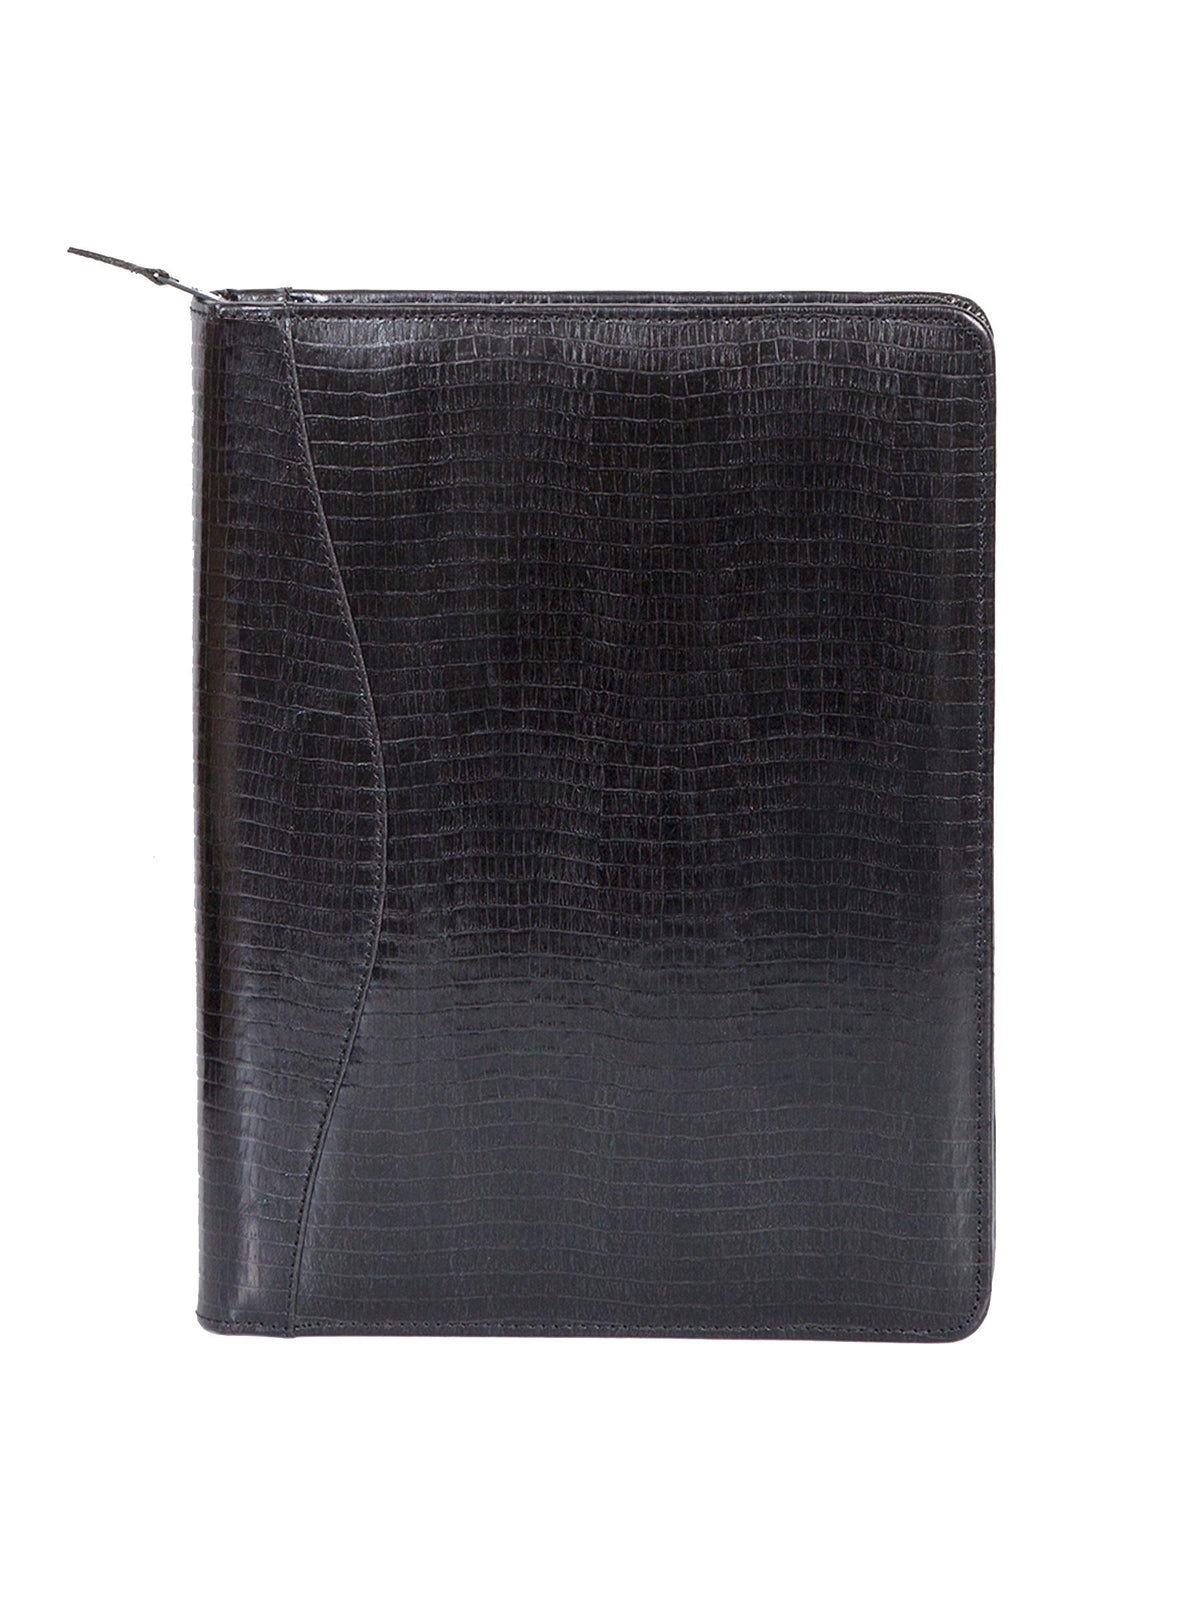 Scully Leather Black Lizard Leather Wirebound Zip Letter Pad - Flyclothing LLC